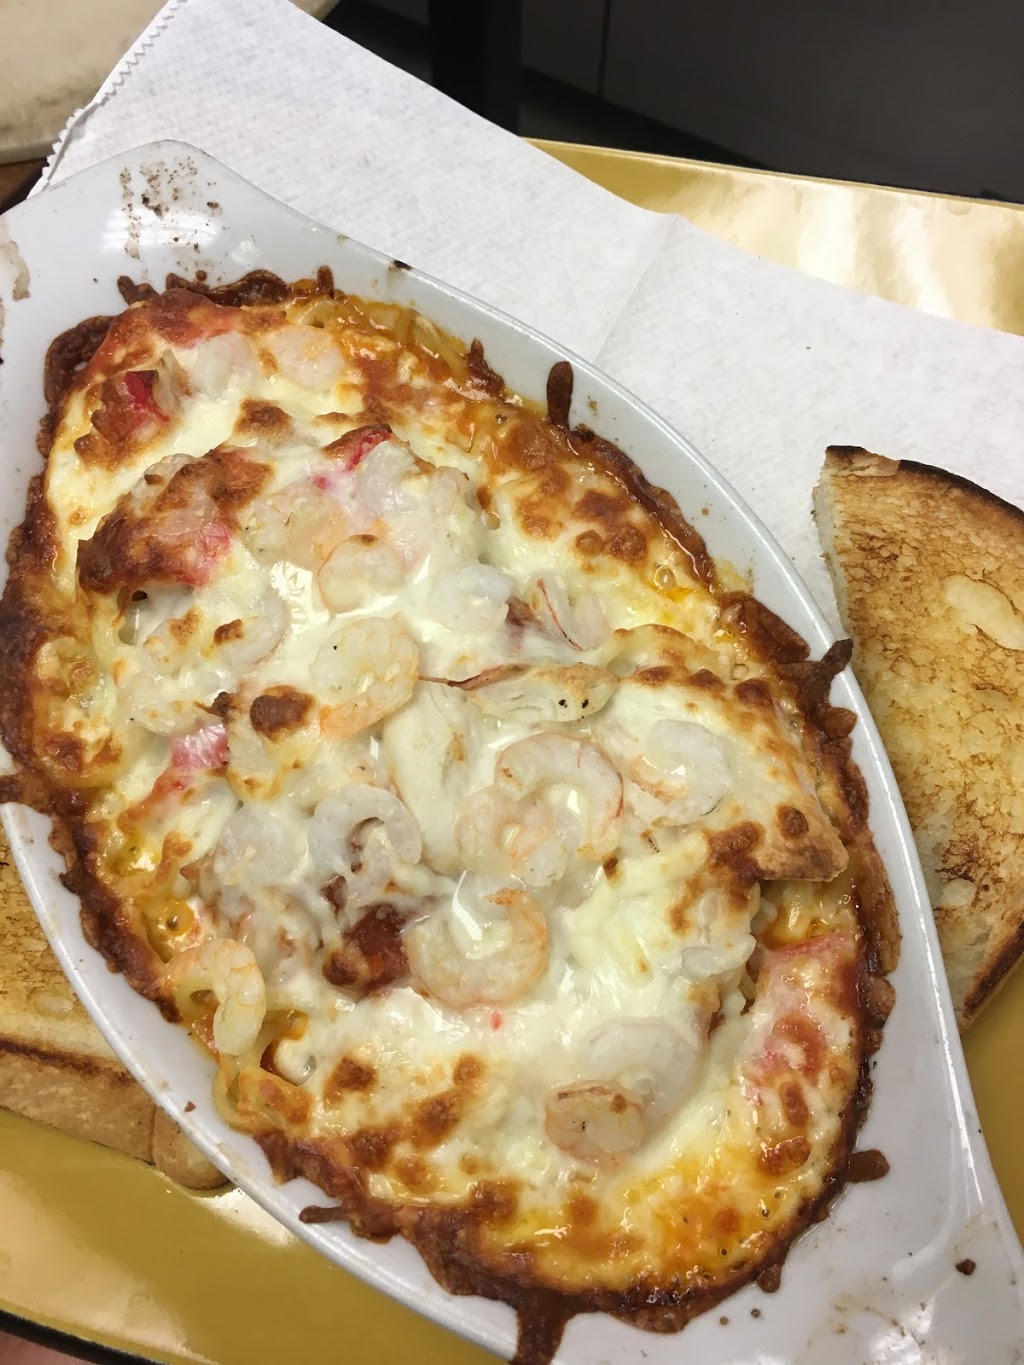 stavely’s pizza and pasta | restaurant | 5005 50 Ave, Stavely, AB T0L 1Z0, Canada | 4035490088 OR +1 403-549-0088